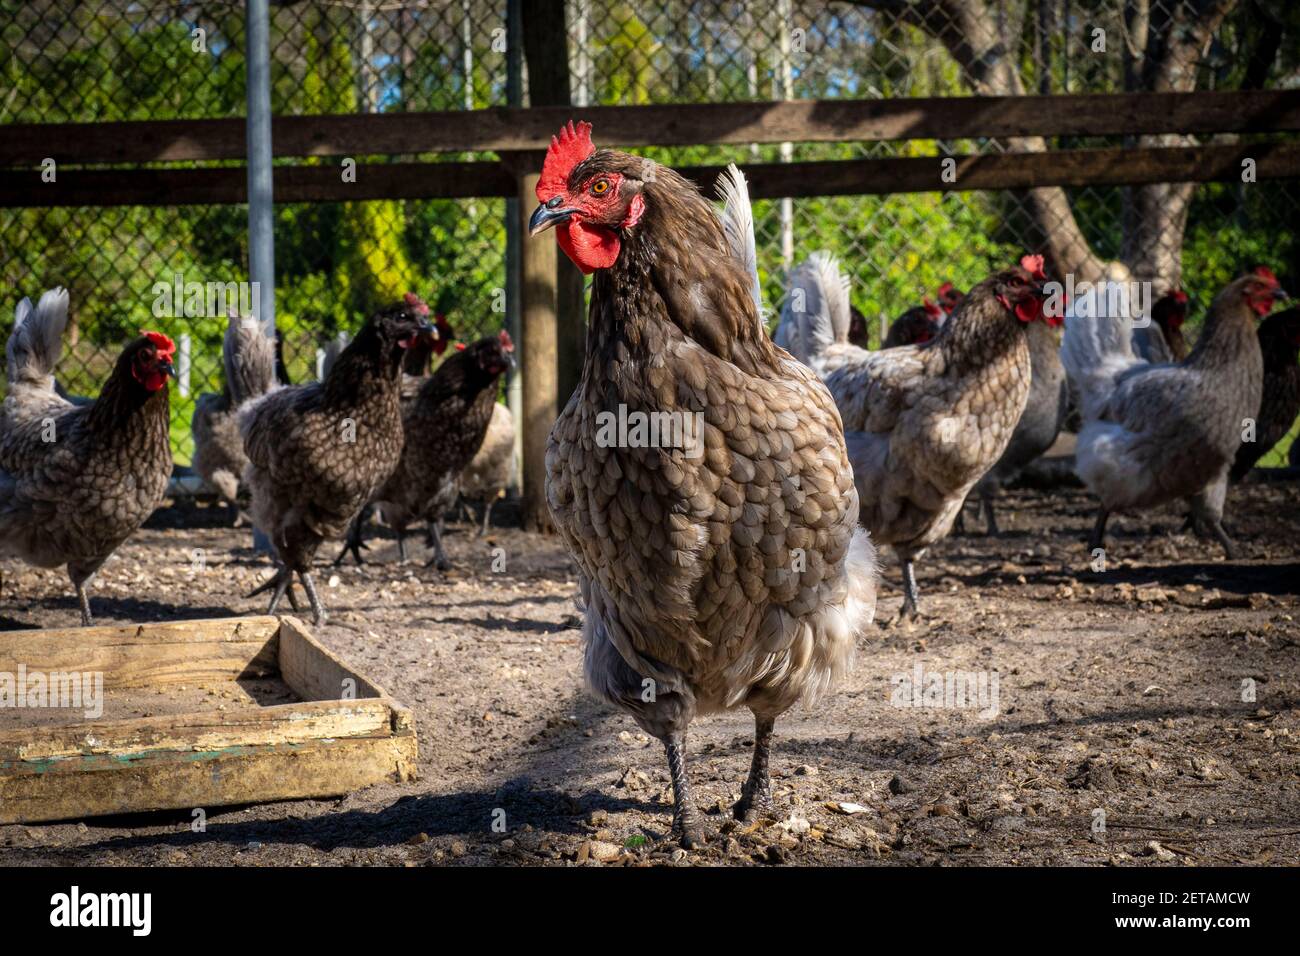 Blue Plymouth Rock chickens in their coop at Holman Harvest Farm, a free range and organic farm raising raises chickens, cattle, vegetables, and tropical fruit February 25, 2021 in Loxahatchee Groves, Florida. Stock Photo